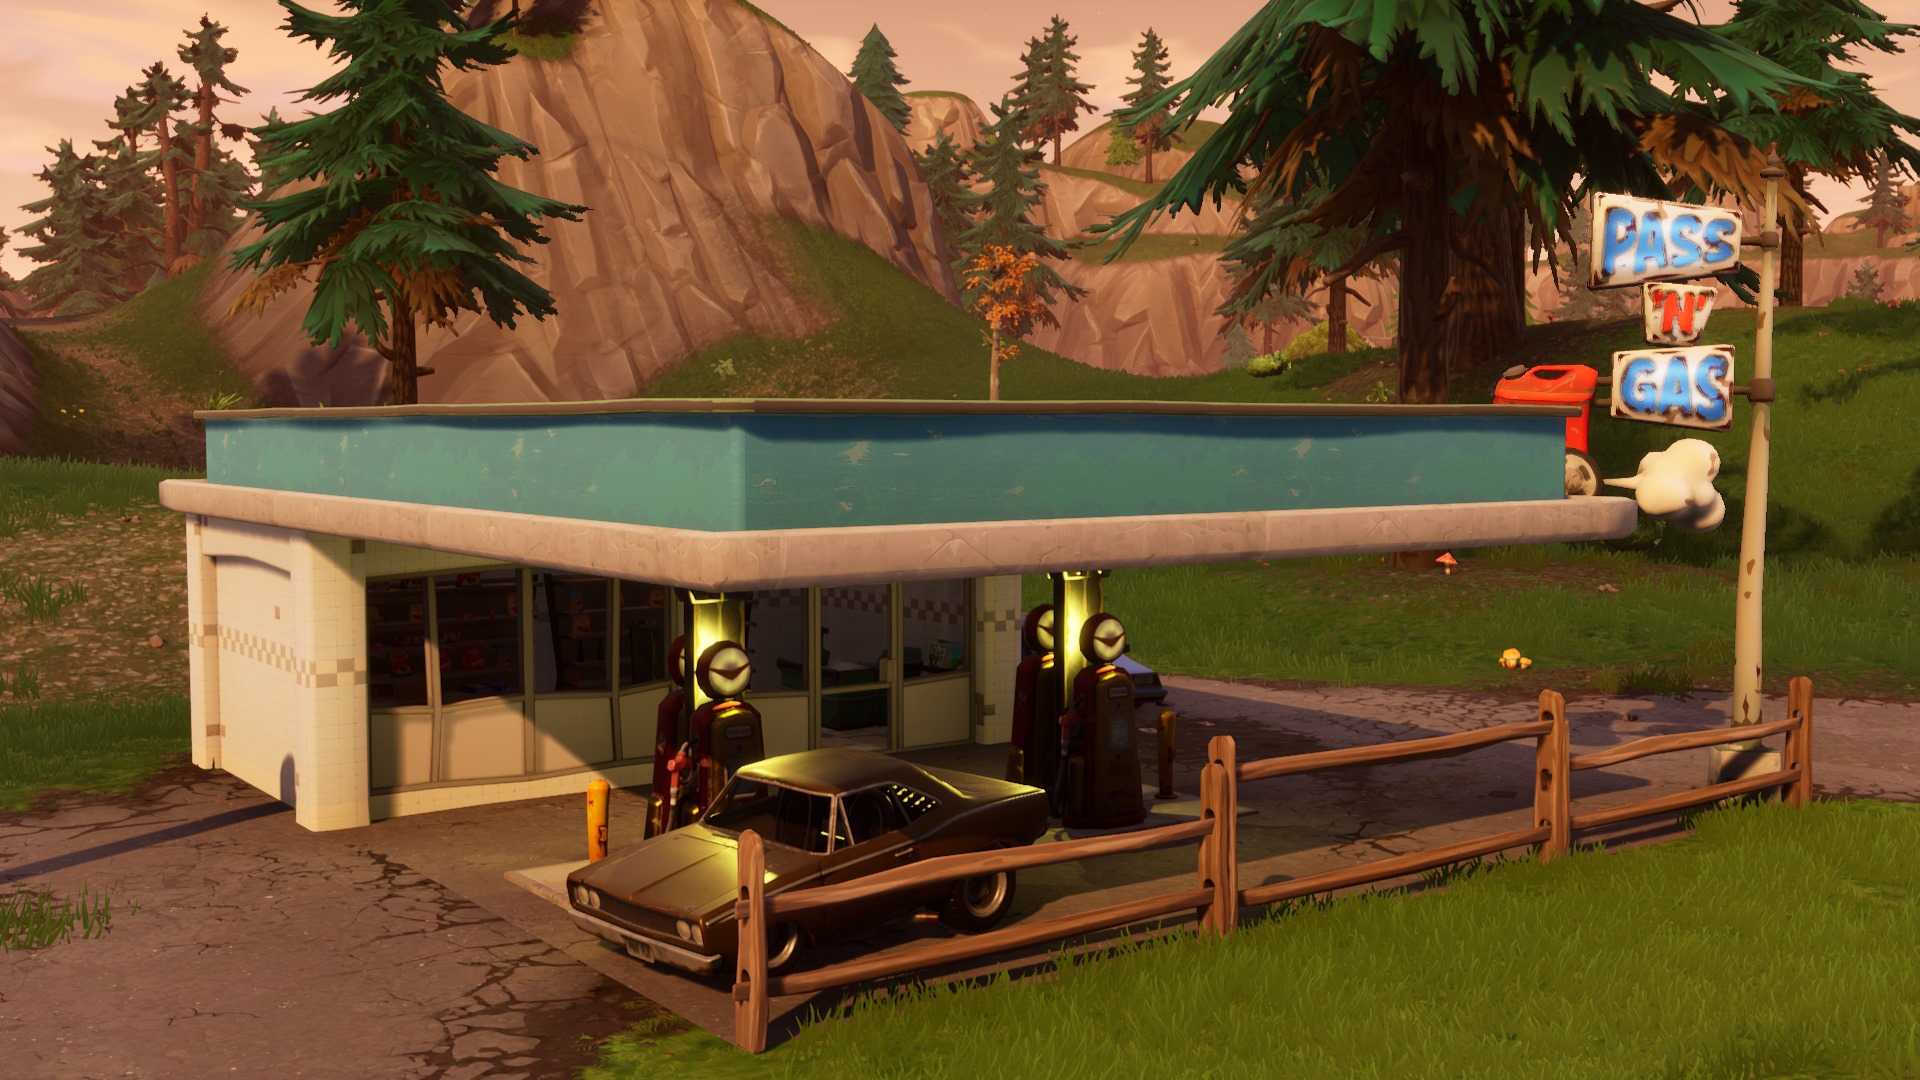 Pass_'N'_Gas station in fortnite